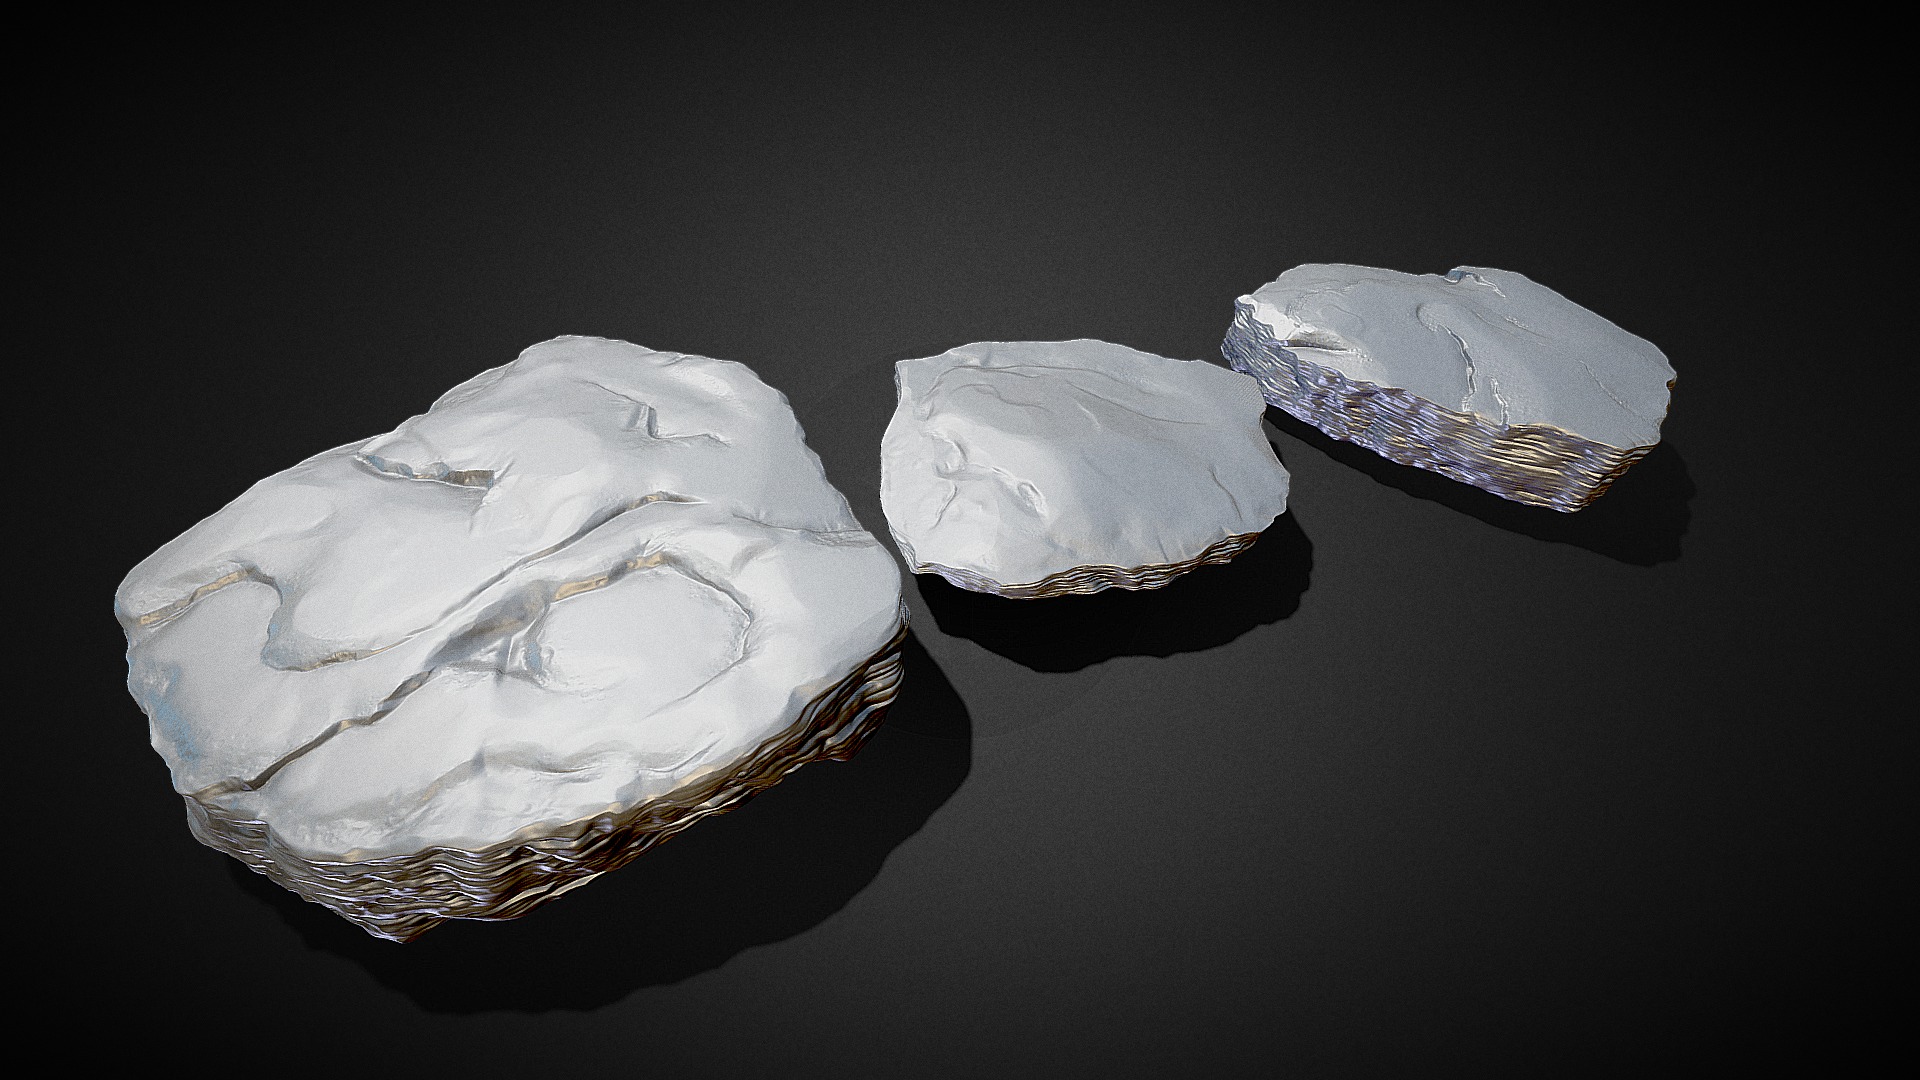 3D model 3D Rock Plates – High Poly - This is a 3D model of the 3D Rock Plates - High Poly. The 3D model is about a few white crystals.